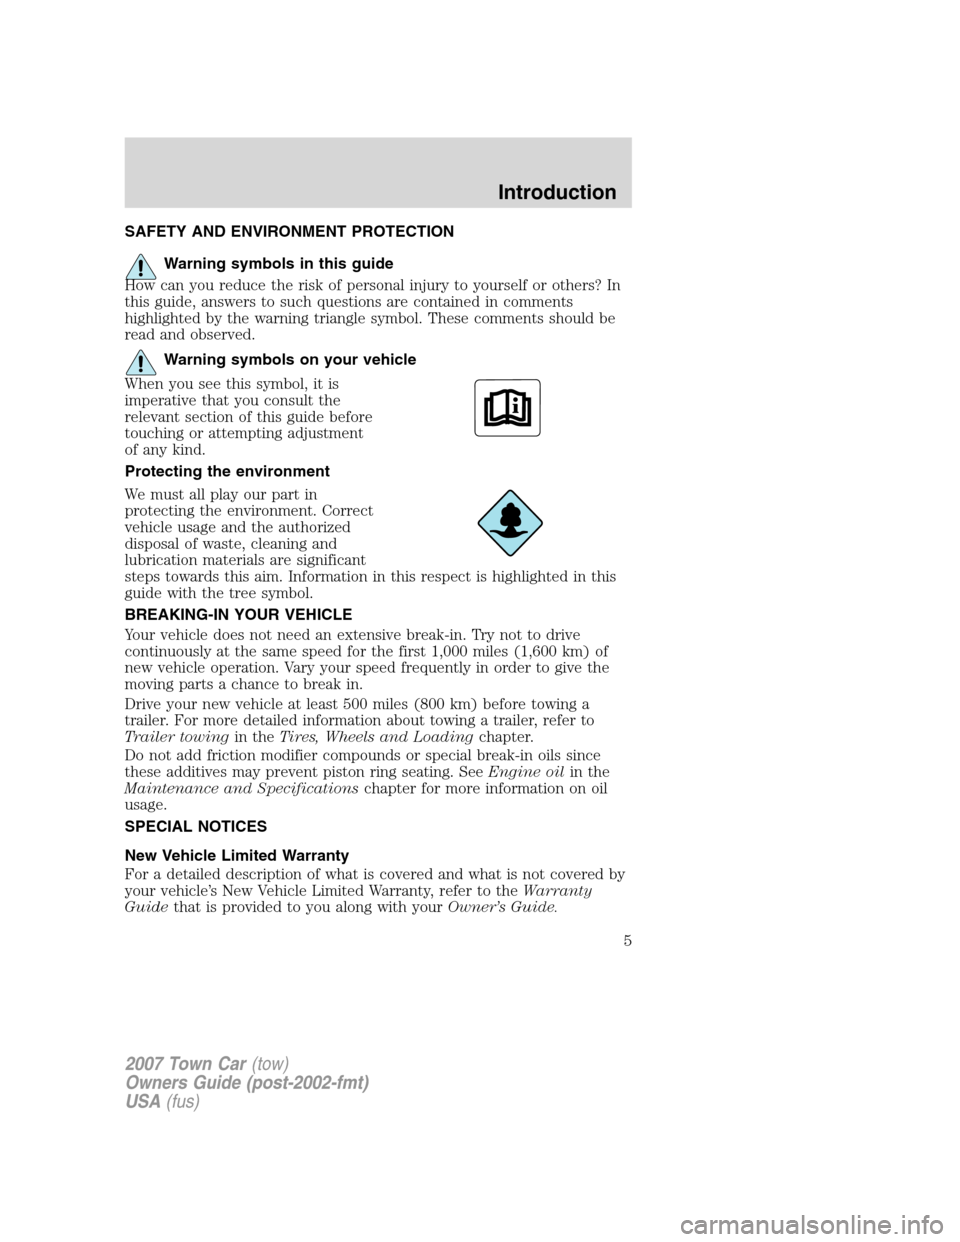 LINCOLN TOWN CAR 2007  Owners Manual SAFETY AND ENVIRONMENT PROTECTION
Warning symbols in this guide
How can you reduce the risk of personal injury to yourself or others? In
this guide, answers to such questions are contained in comments